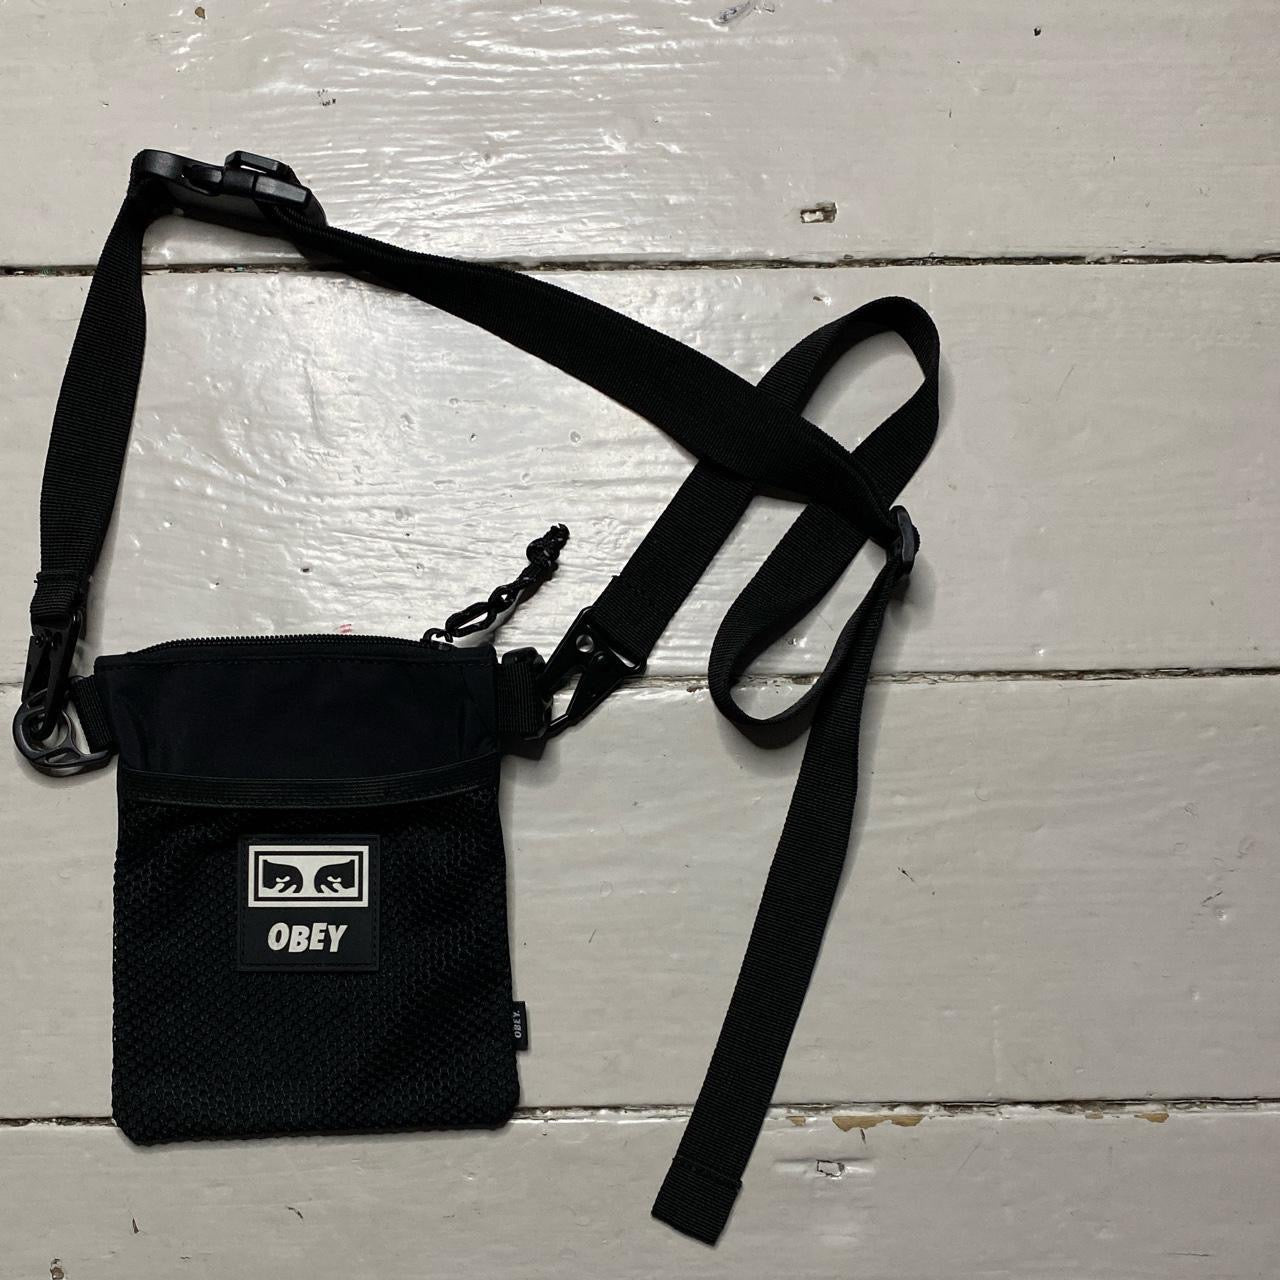 Obey Pouch Bag